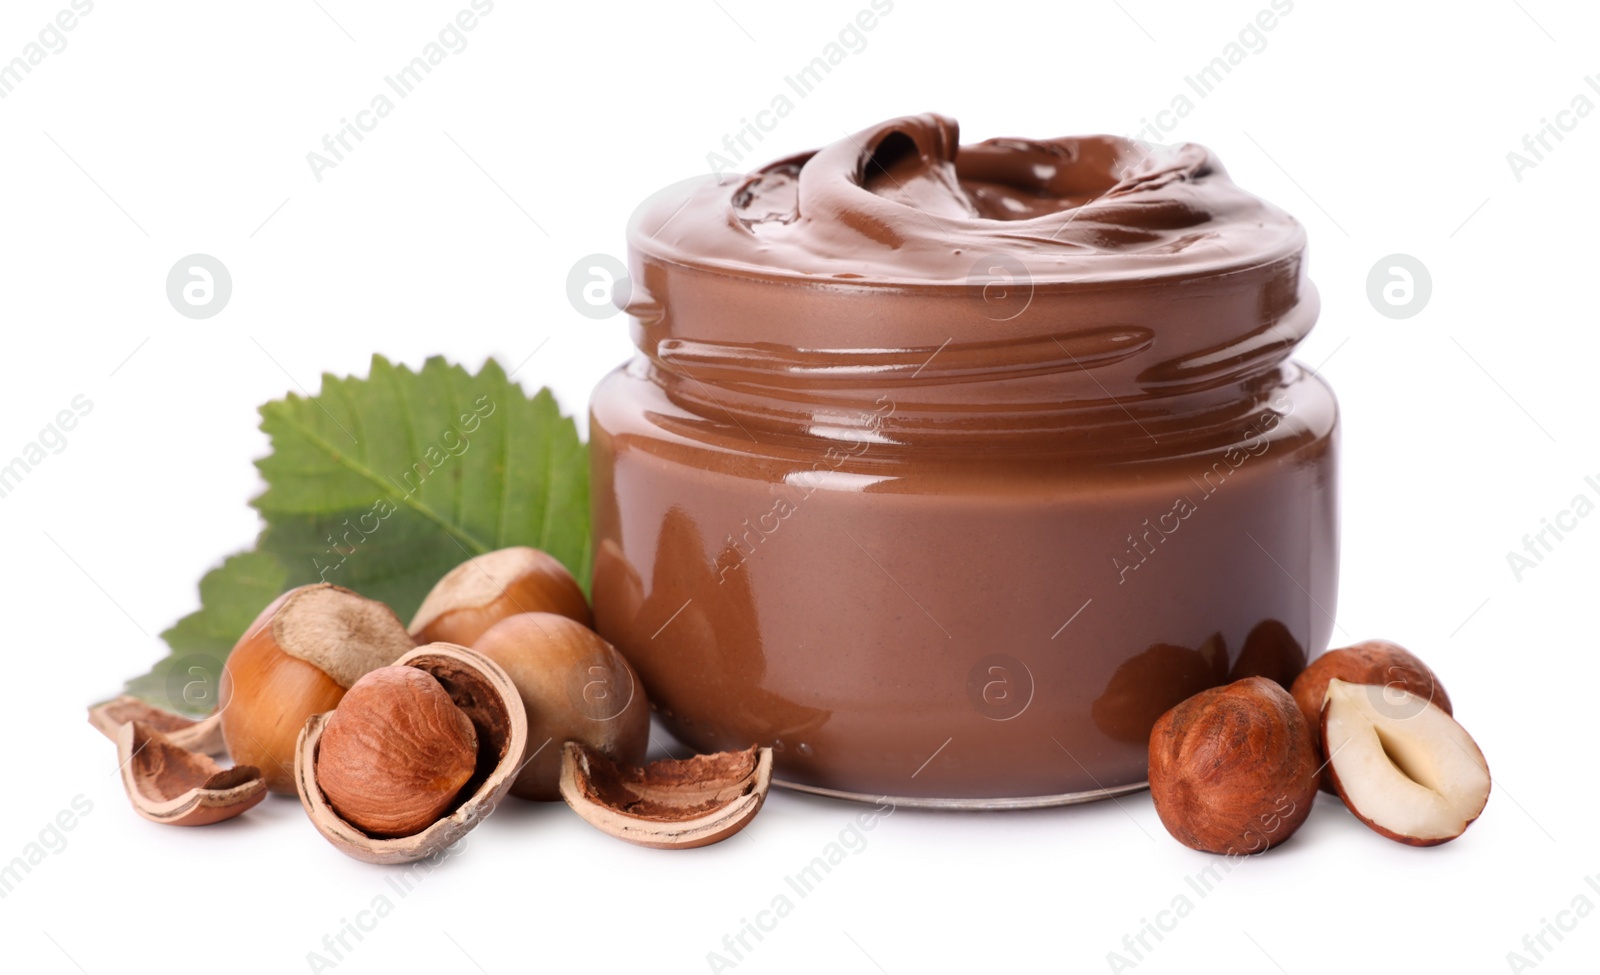 Photo of Glass jar with tasty chocolate spread, hazelnuts and green leaves on white background